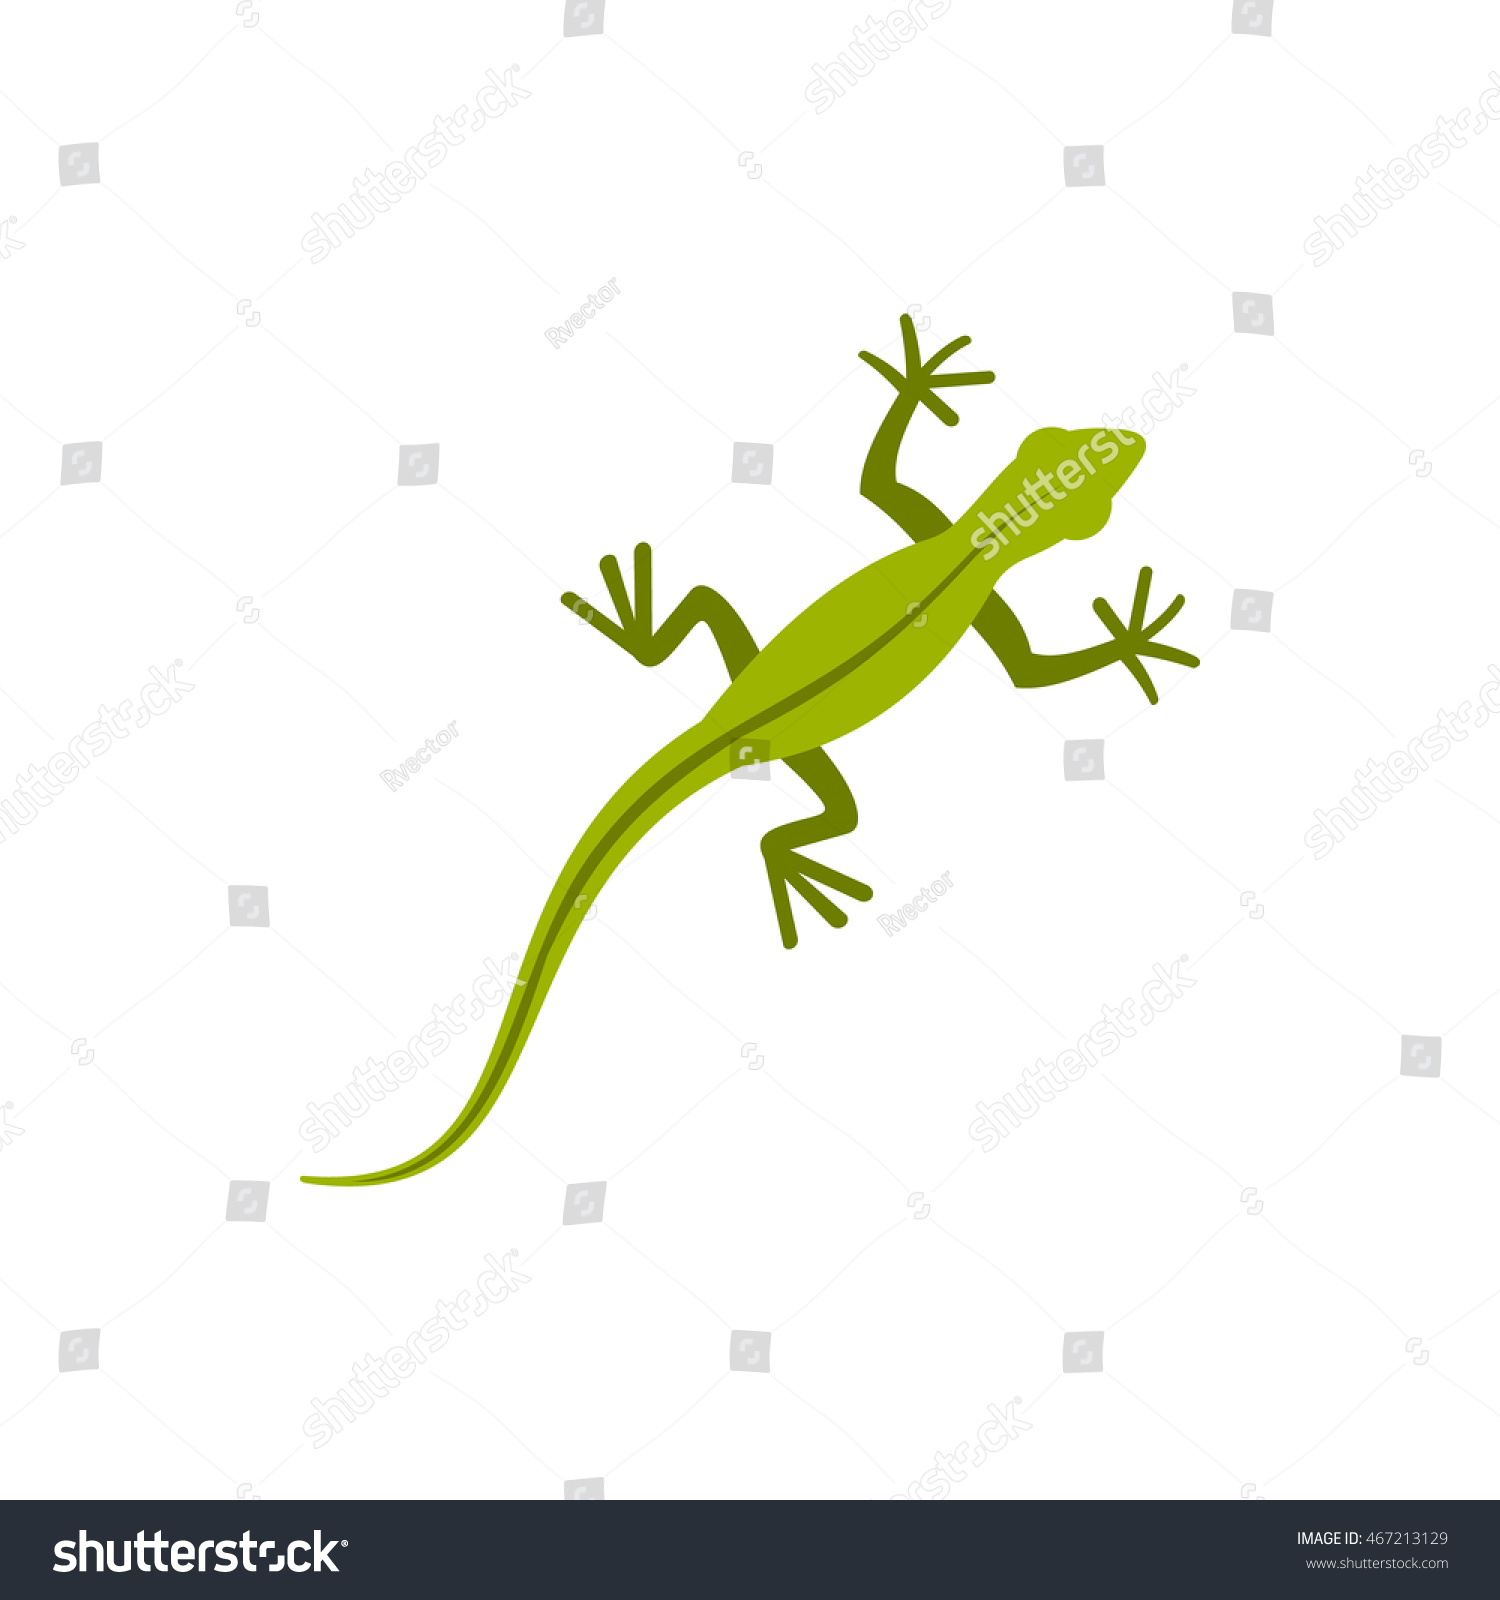 SVG of Lizard icon in flat style on a white background svg